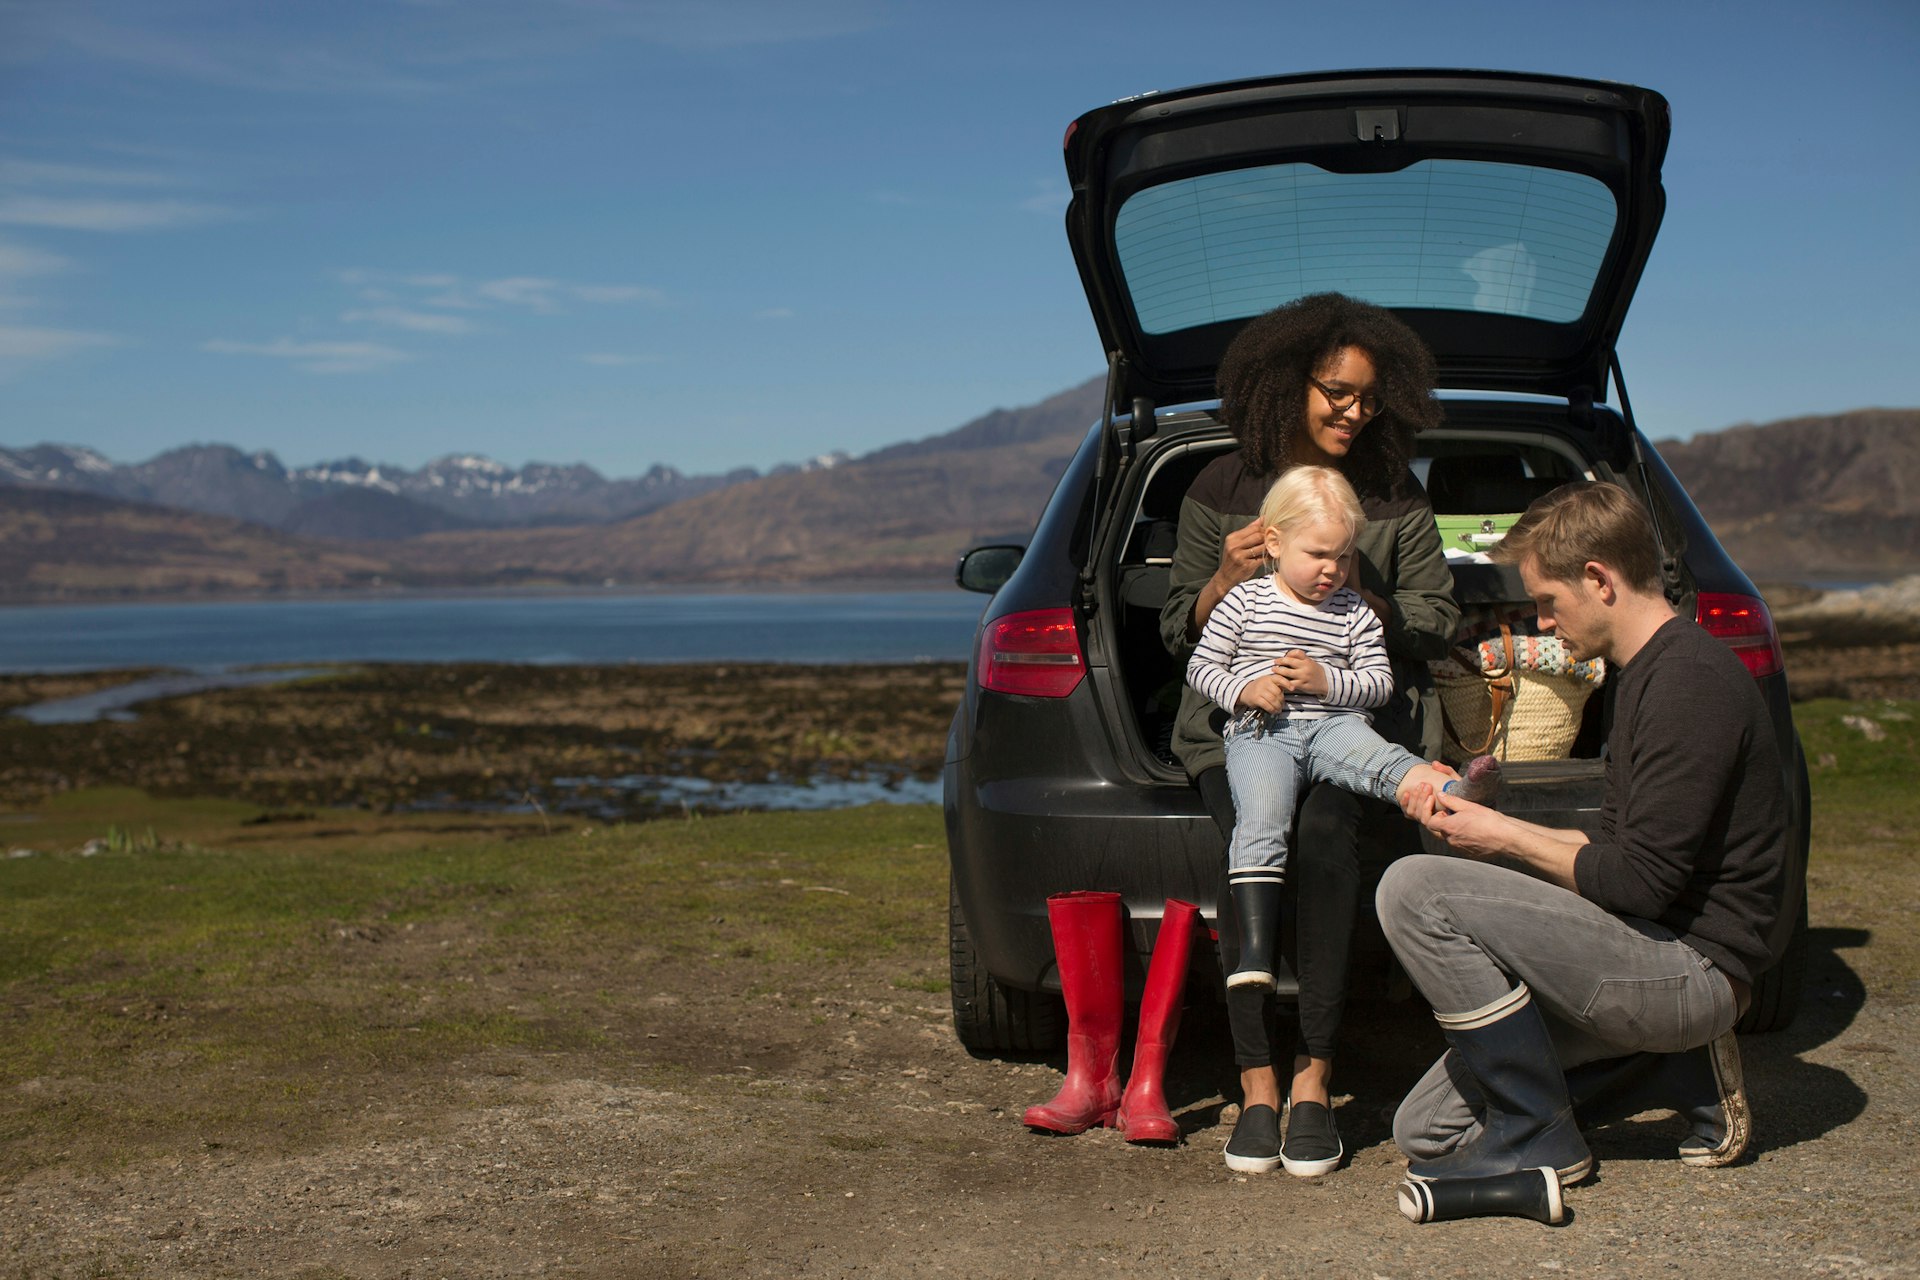 A family of three sit on the open trunk of a car parked by a lake changing shoes following a paddle